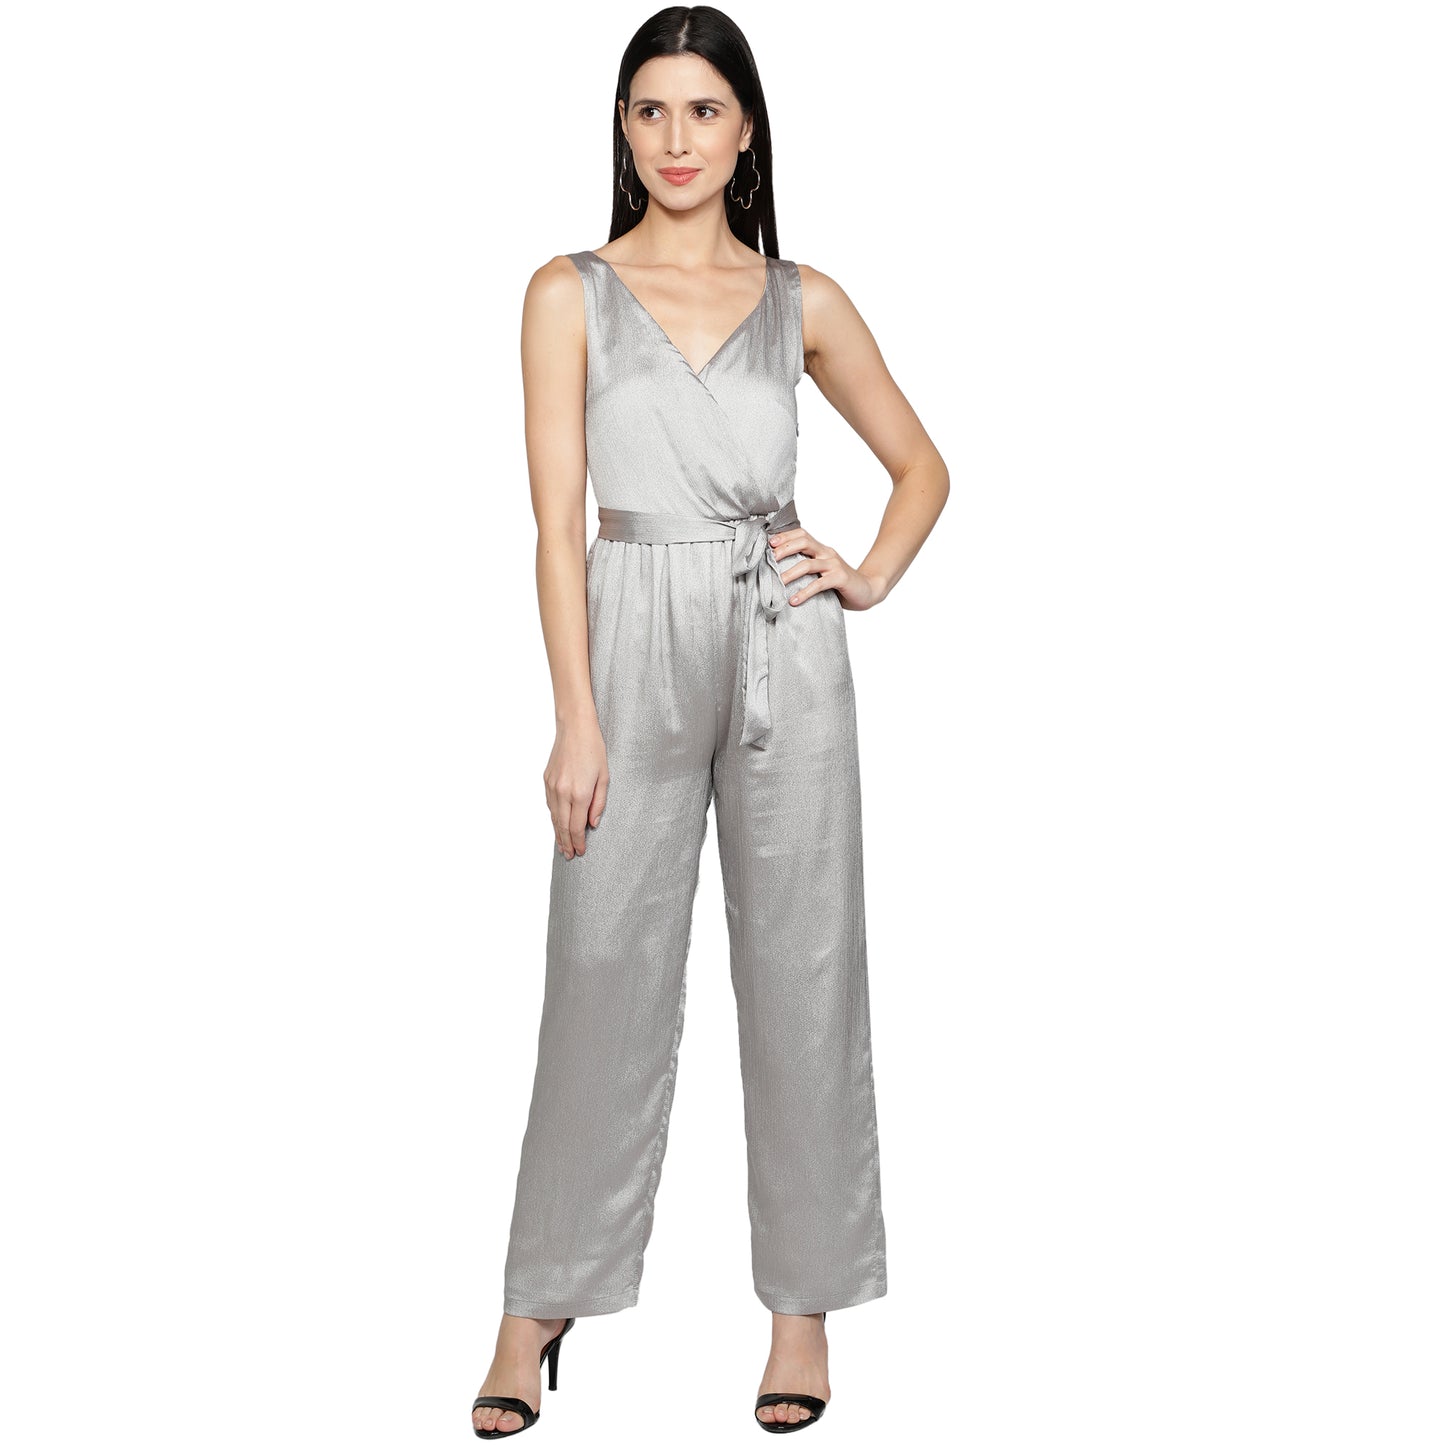 SLAY. Women's Silver Poly Shimmer Jumpsuit with waist belt-clothing-to-slay.myshopify.com-Dress